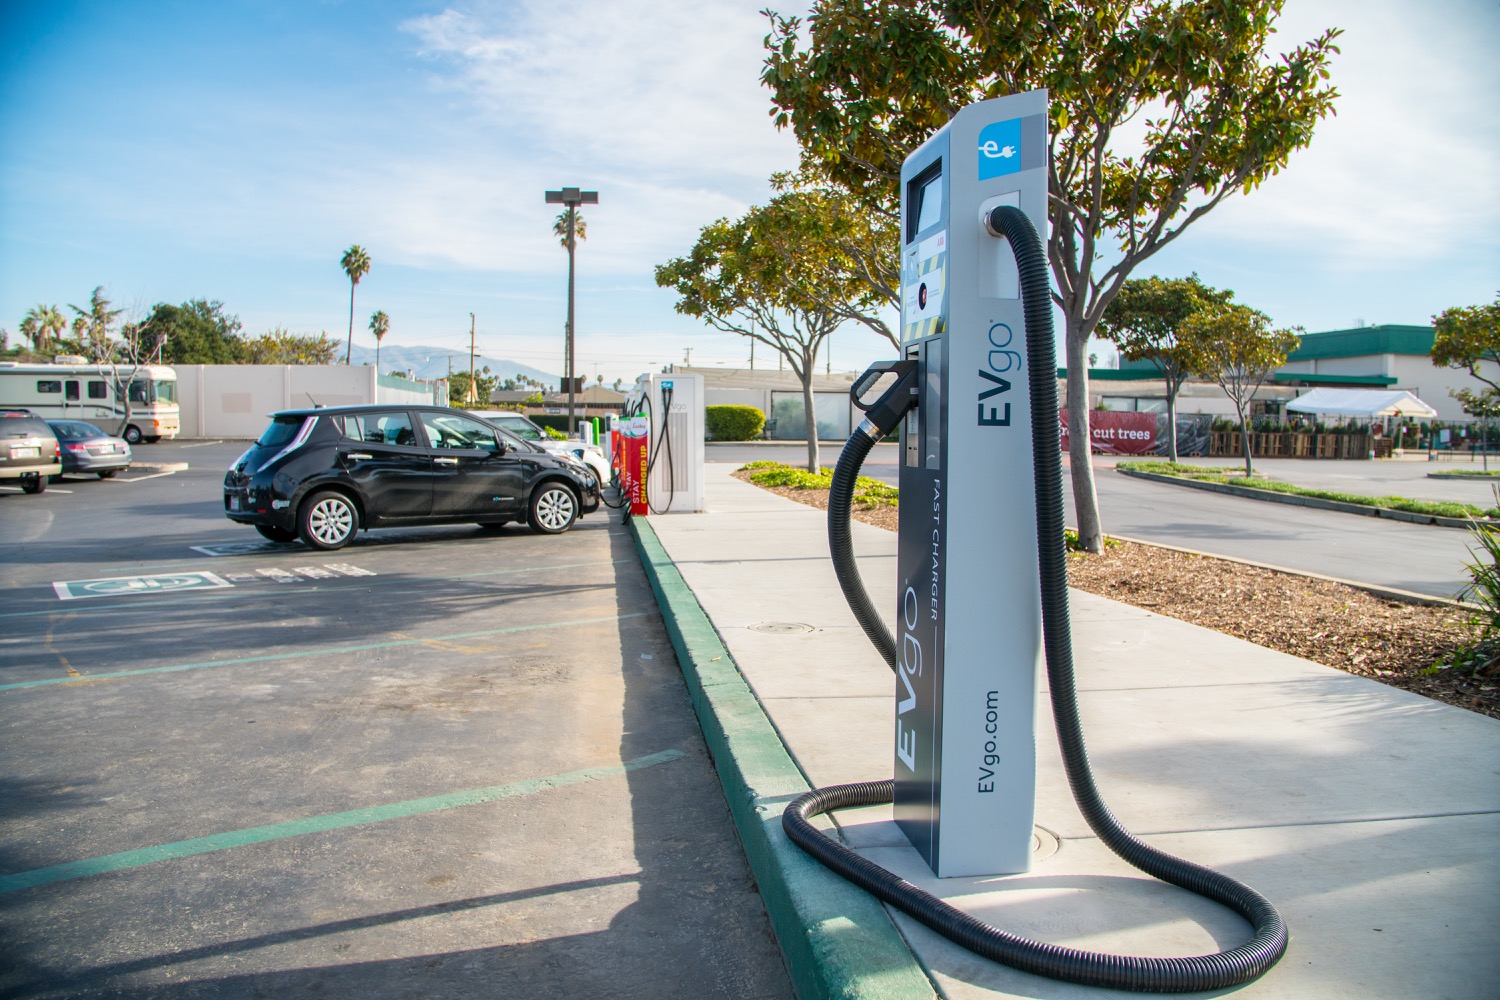 faster-electric-car-fast-charging-test-site-in-fremont-vw-plans-300